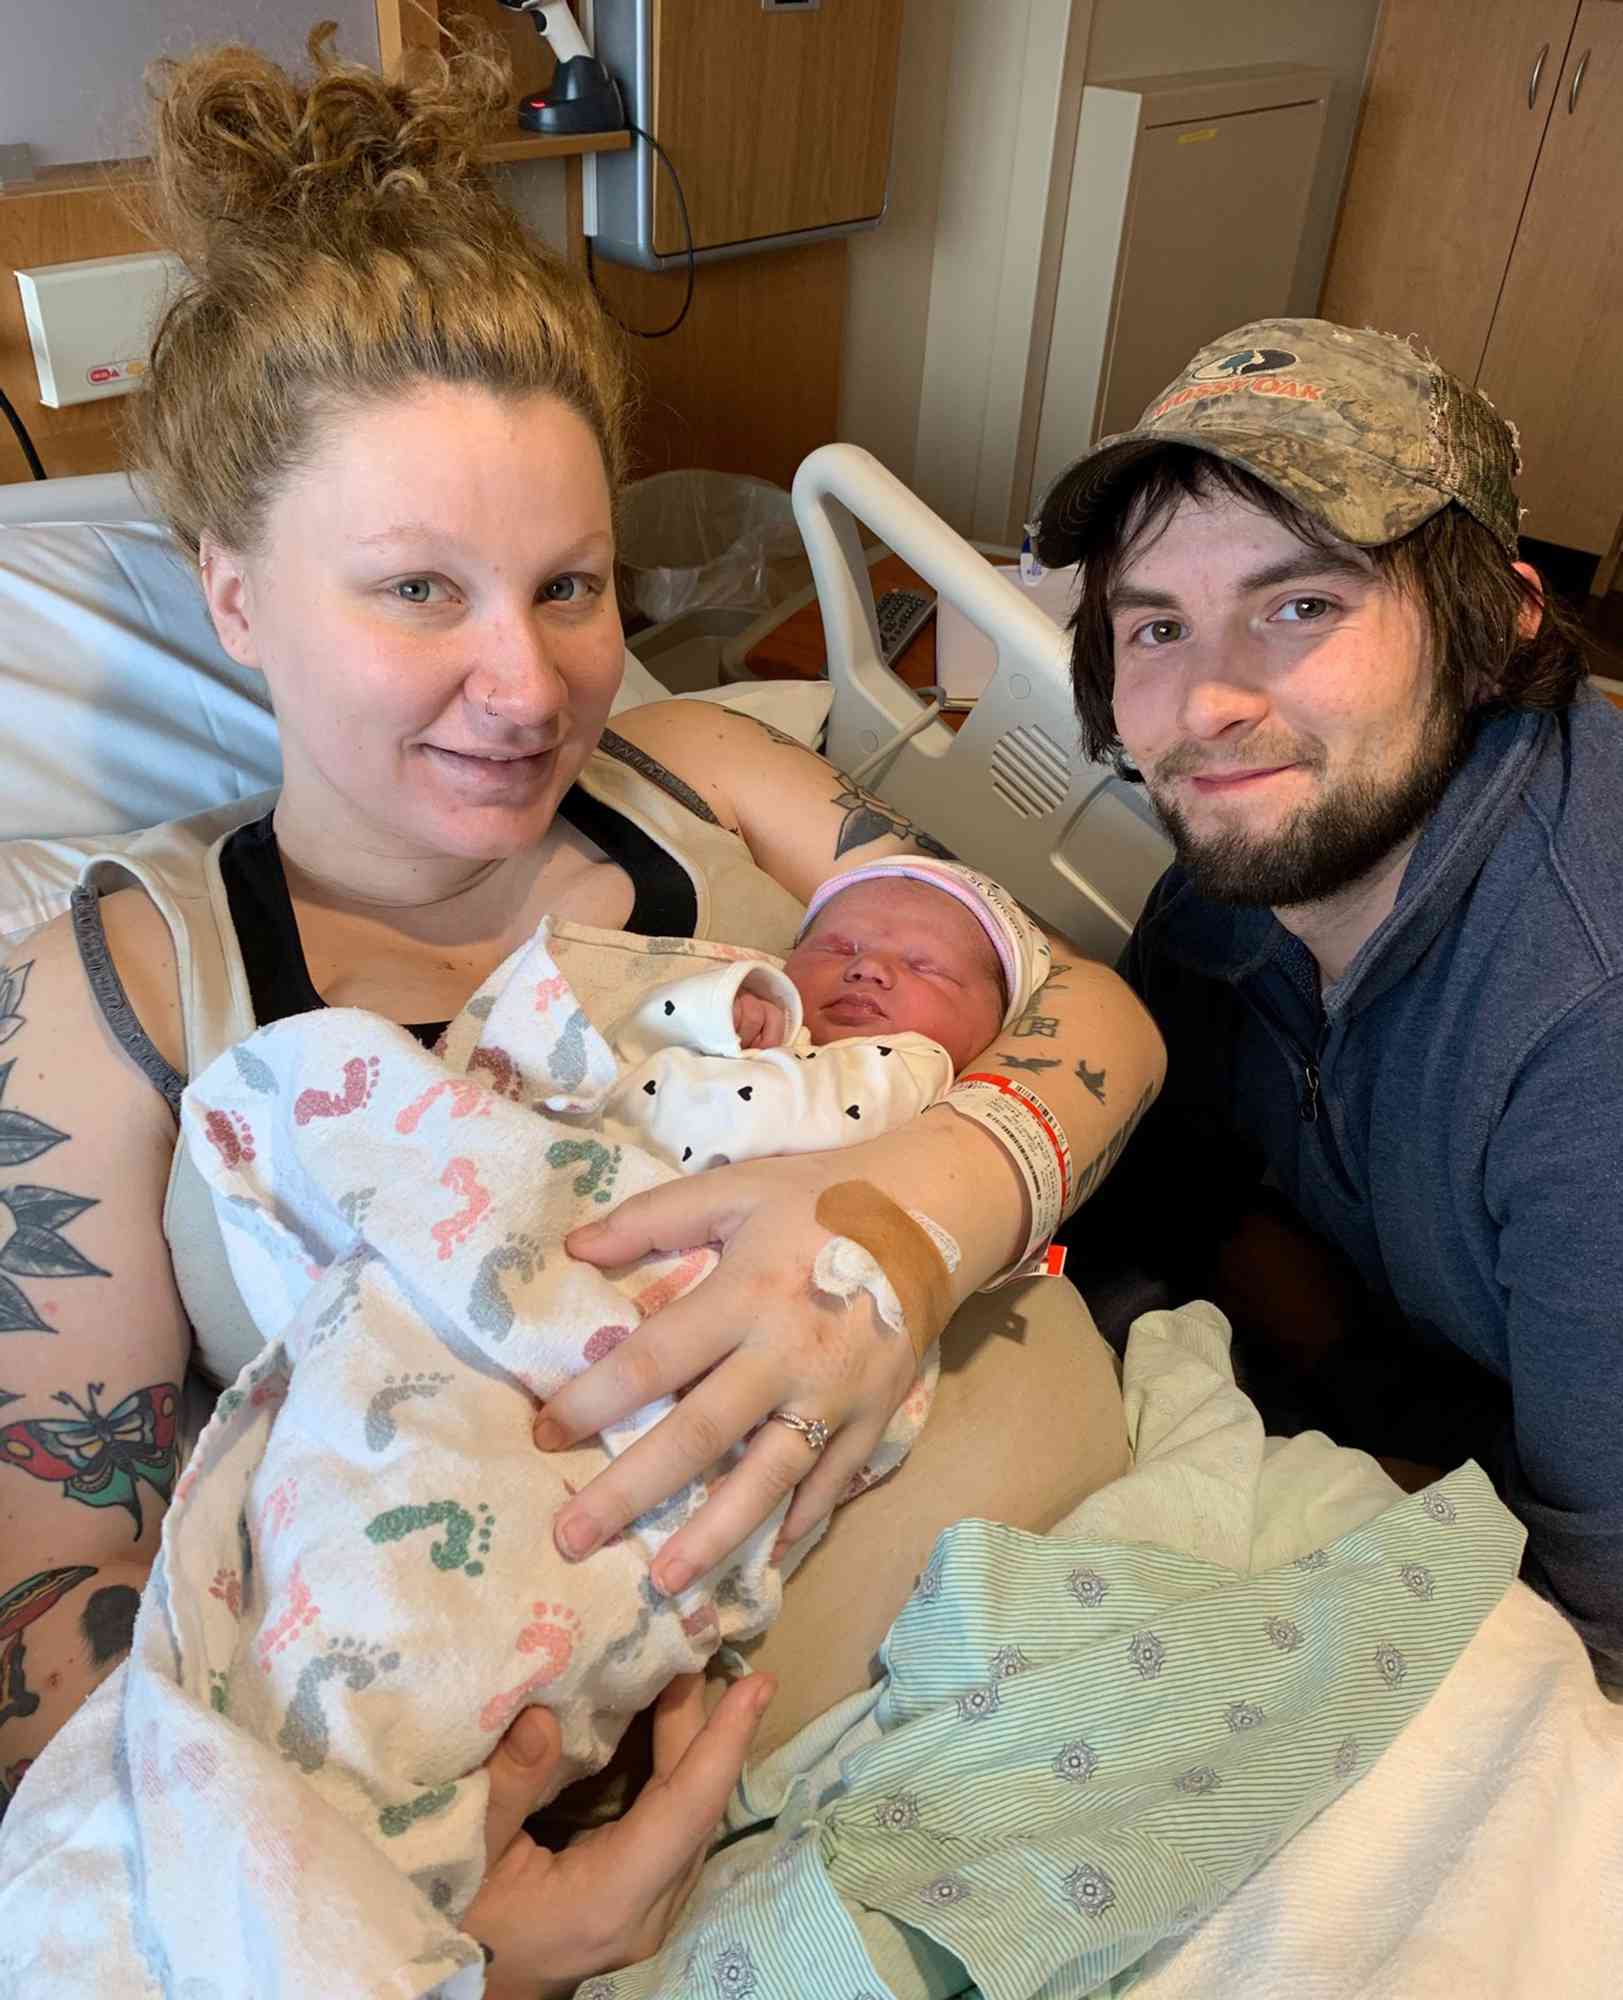 Chelsea O'Donnell and her partner Jake with their newborn Skylar Rose